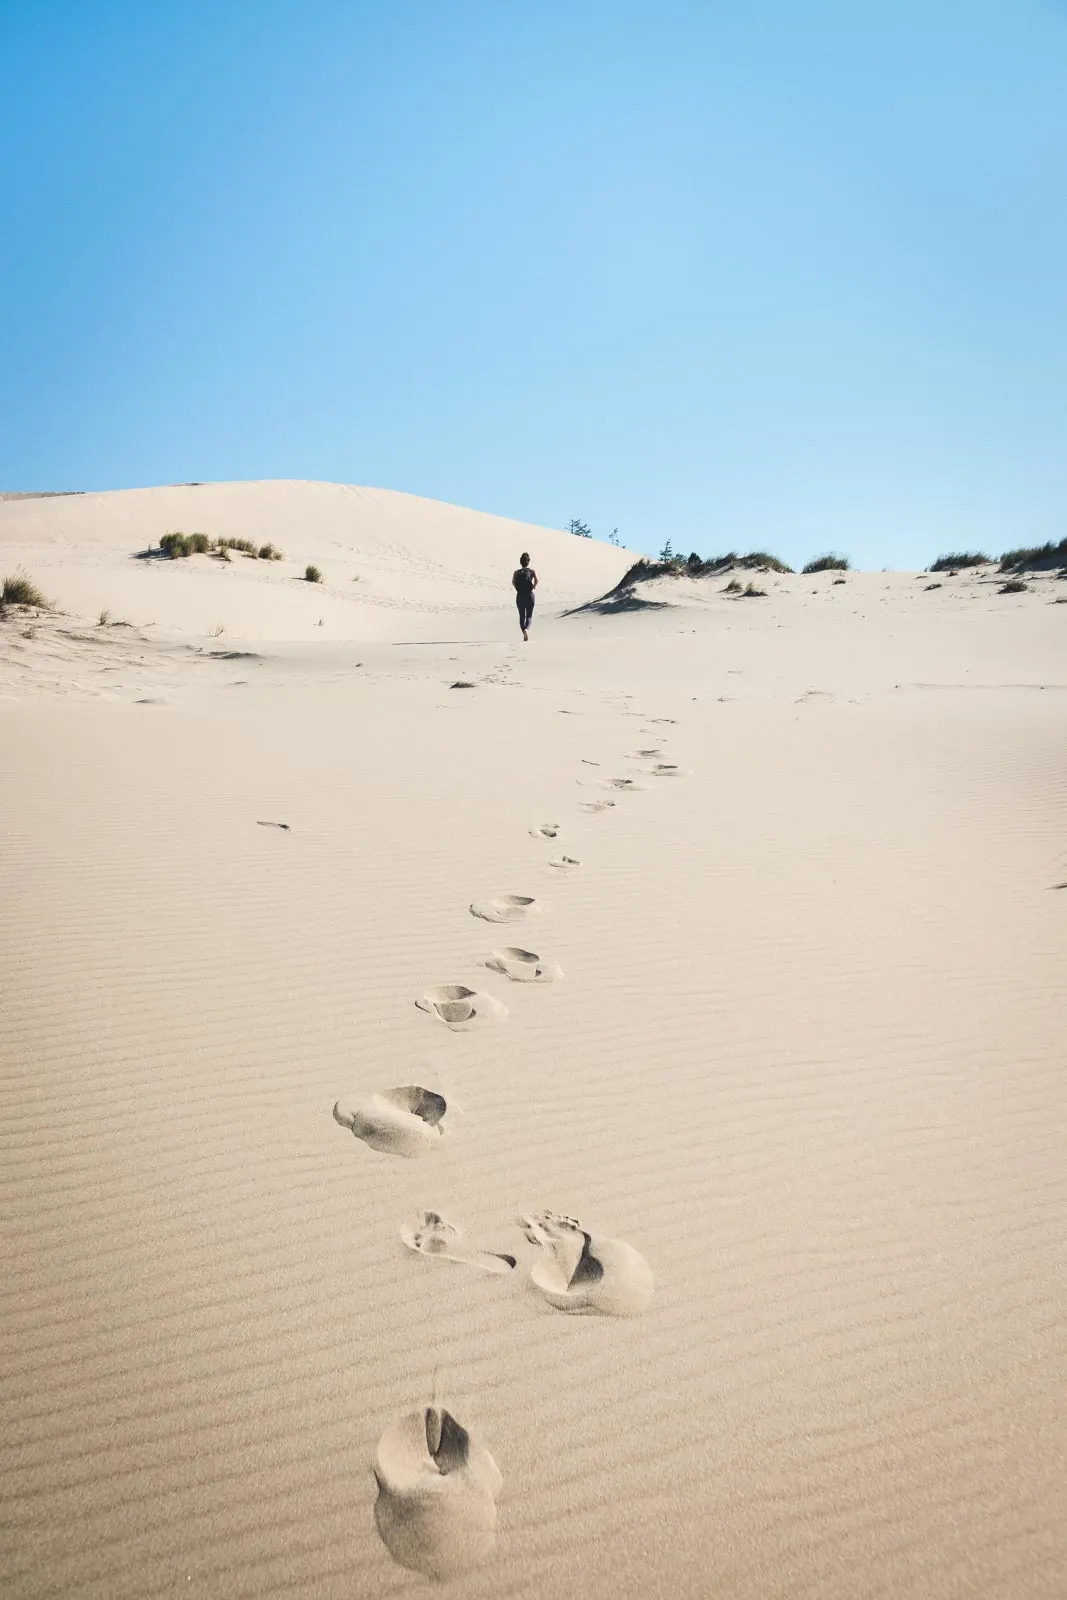 The John Dellenback Trail is a challenging and fun trail in the Oregon sand dunes.